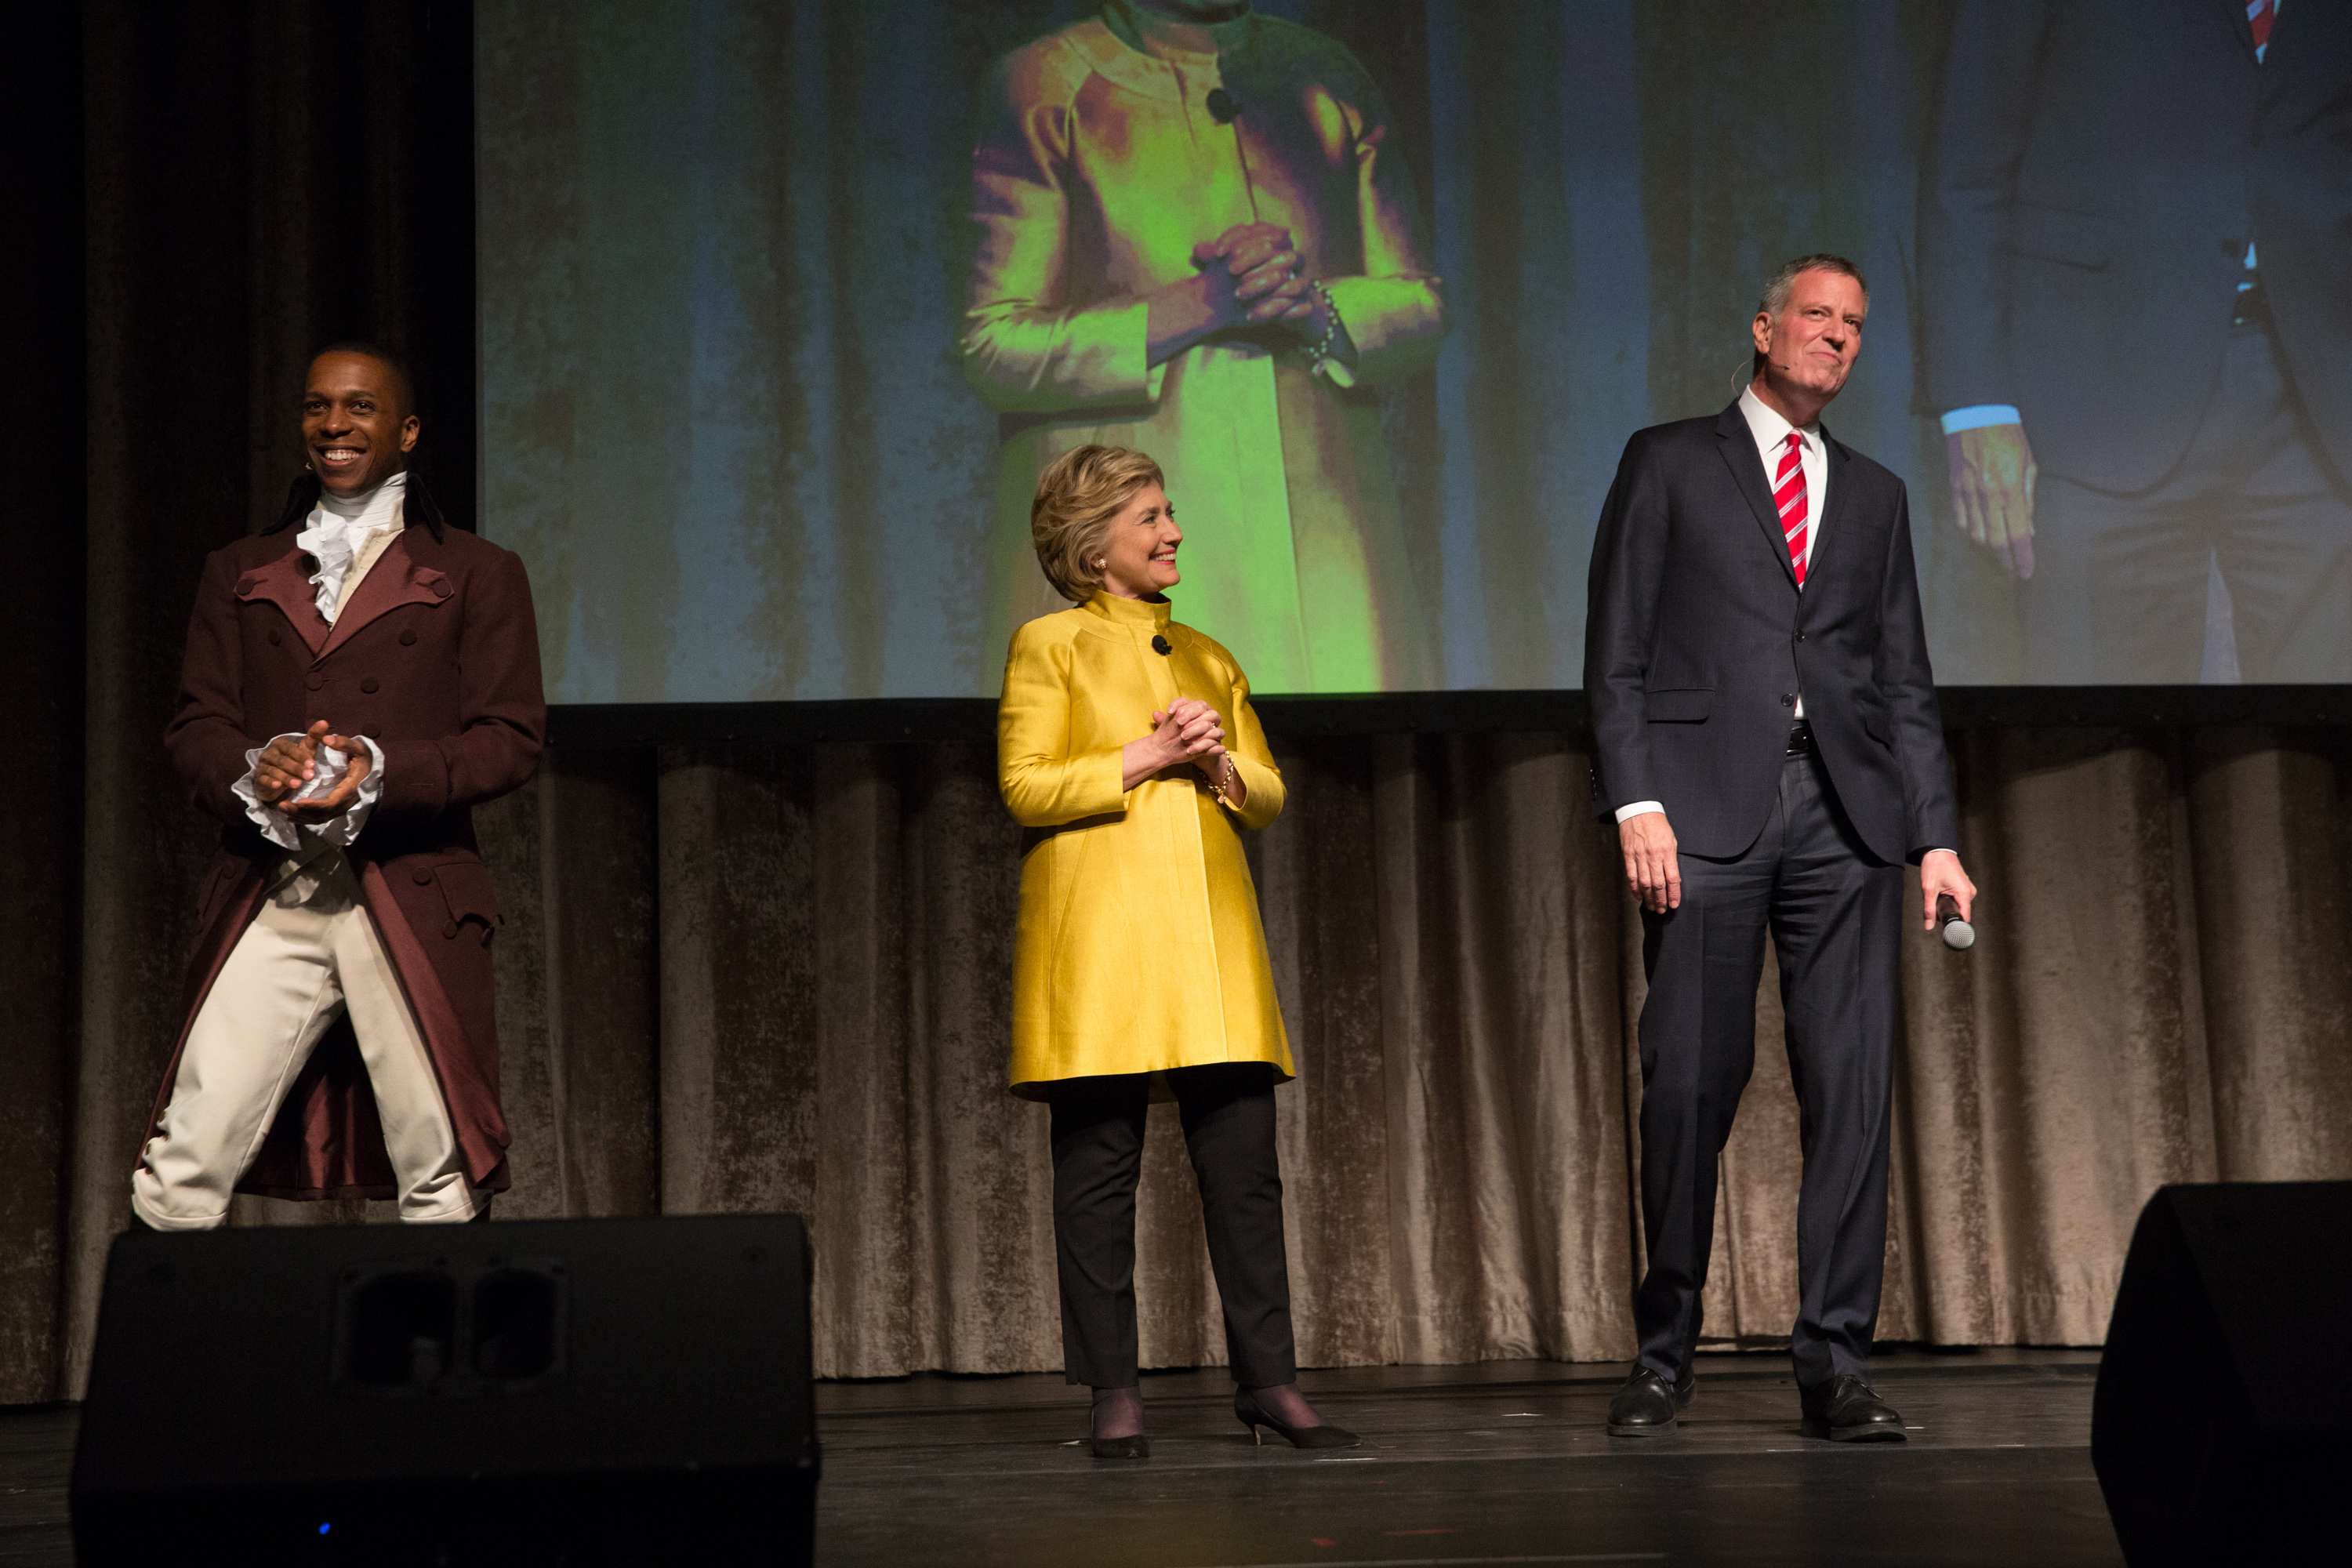 Democratic presidential candidate Hillary Clinton joins Mayor Bill de Blasio as surprise guest during the annual Inner Circle Show with actor and singer Leslie Odom, Jr. at the New York Hilton Midtown on Saturday, April 9, 2016, 